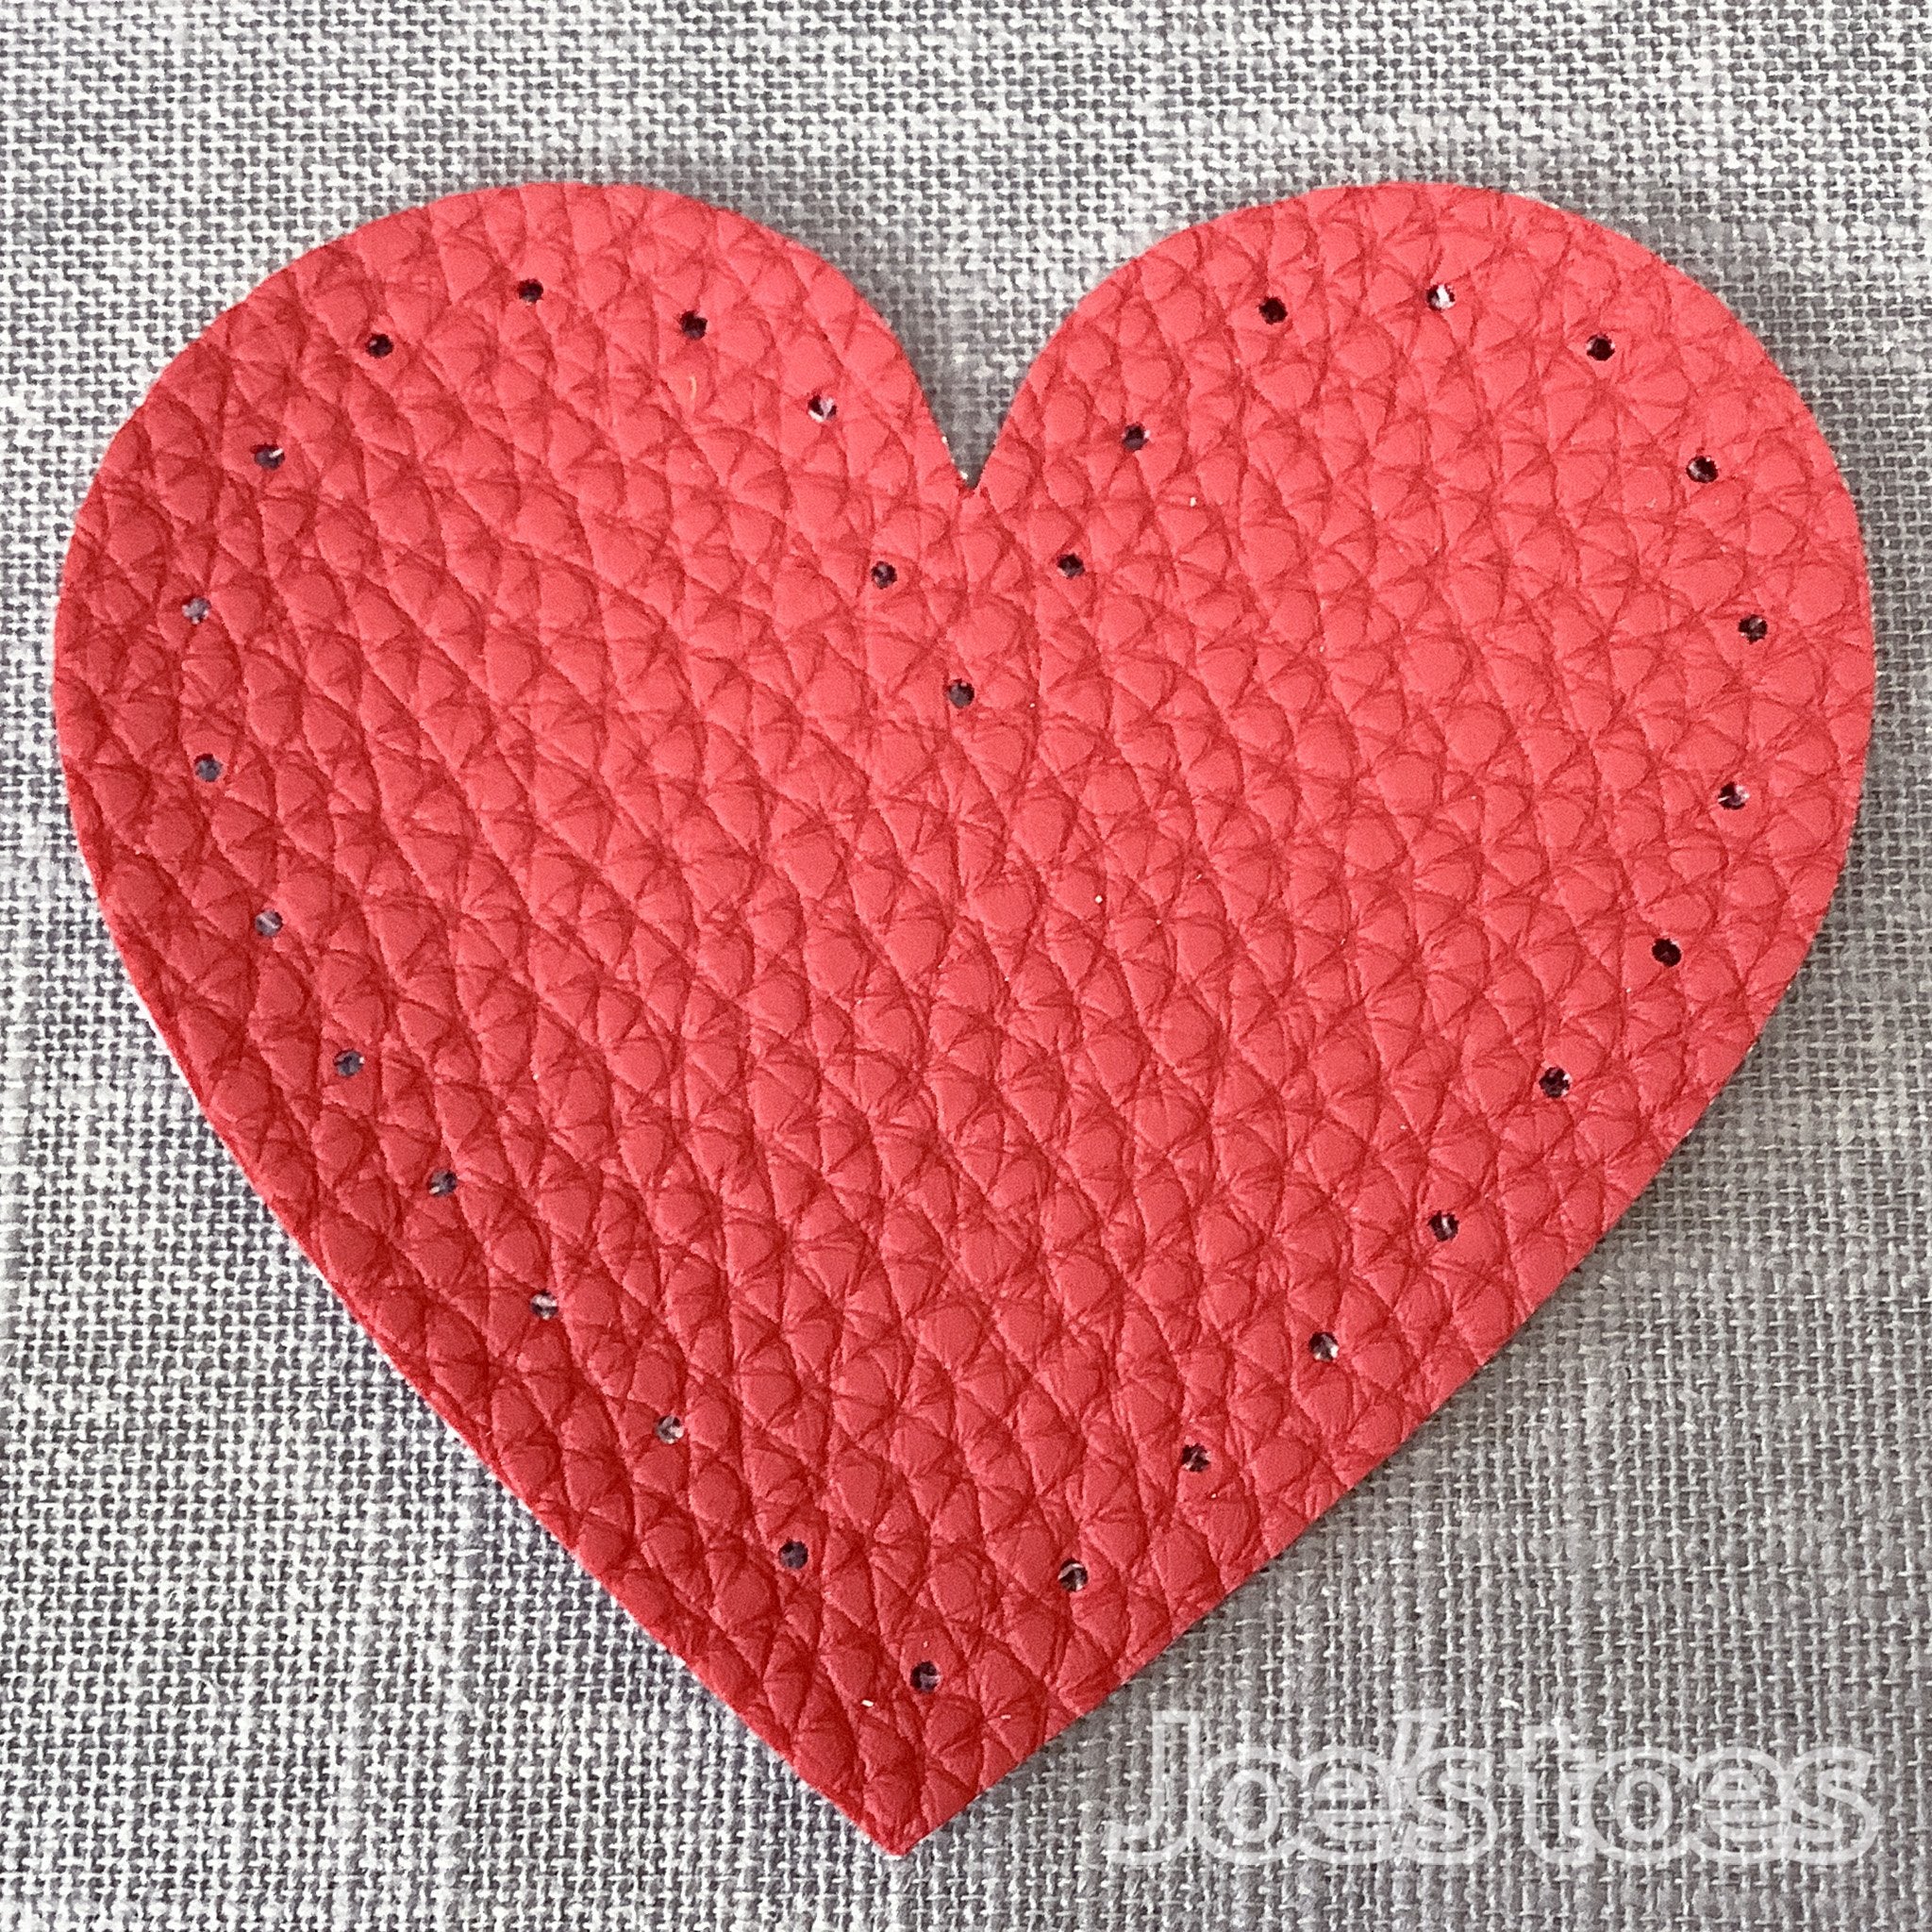 Jean Heart Knee Patches - Sewing Novice